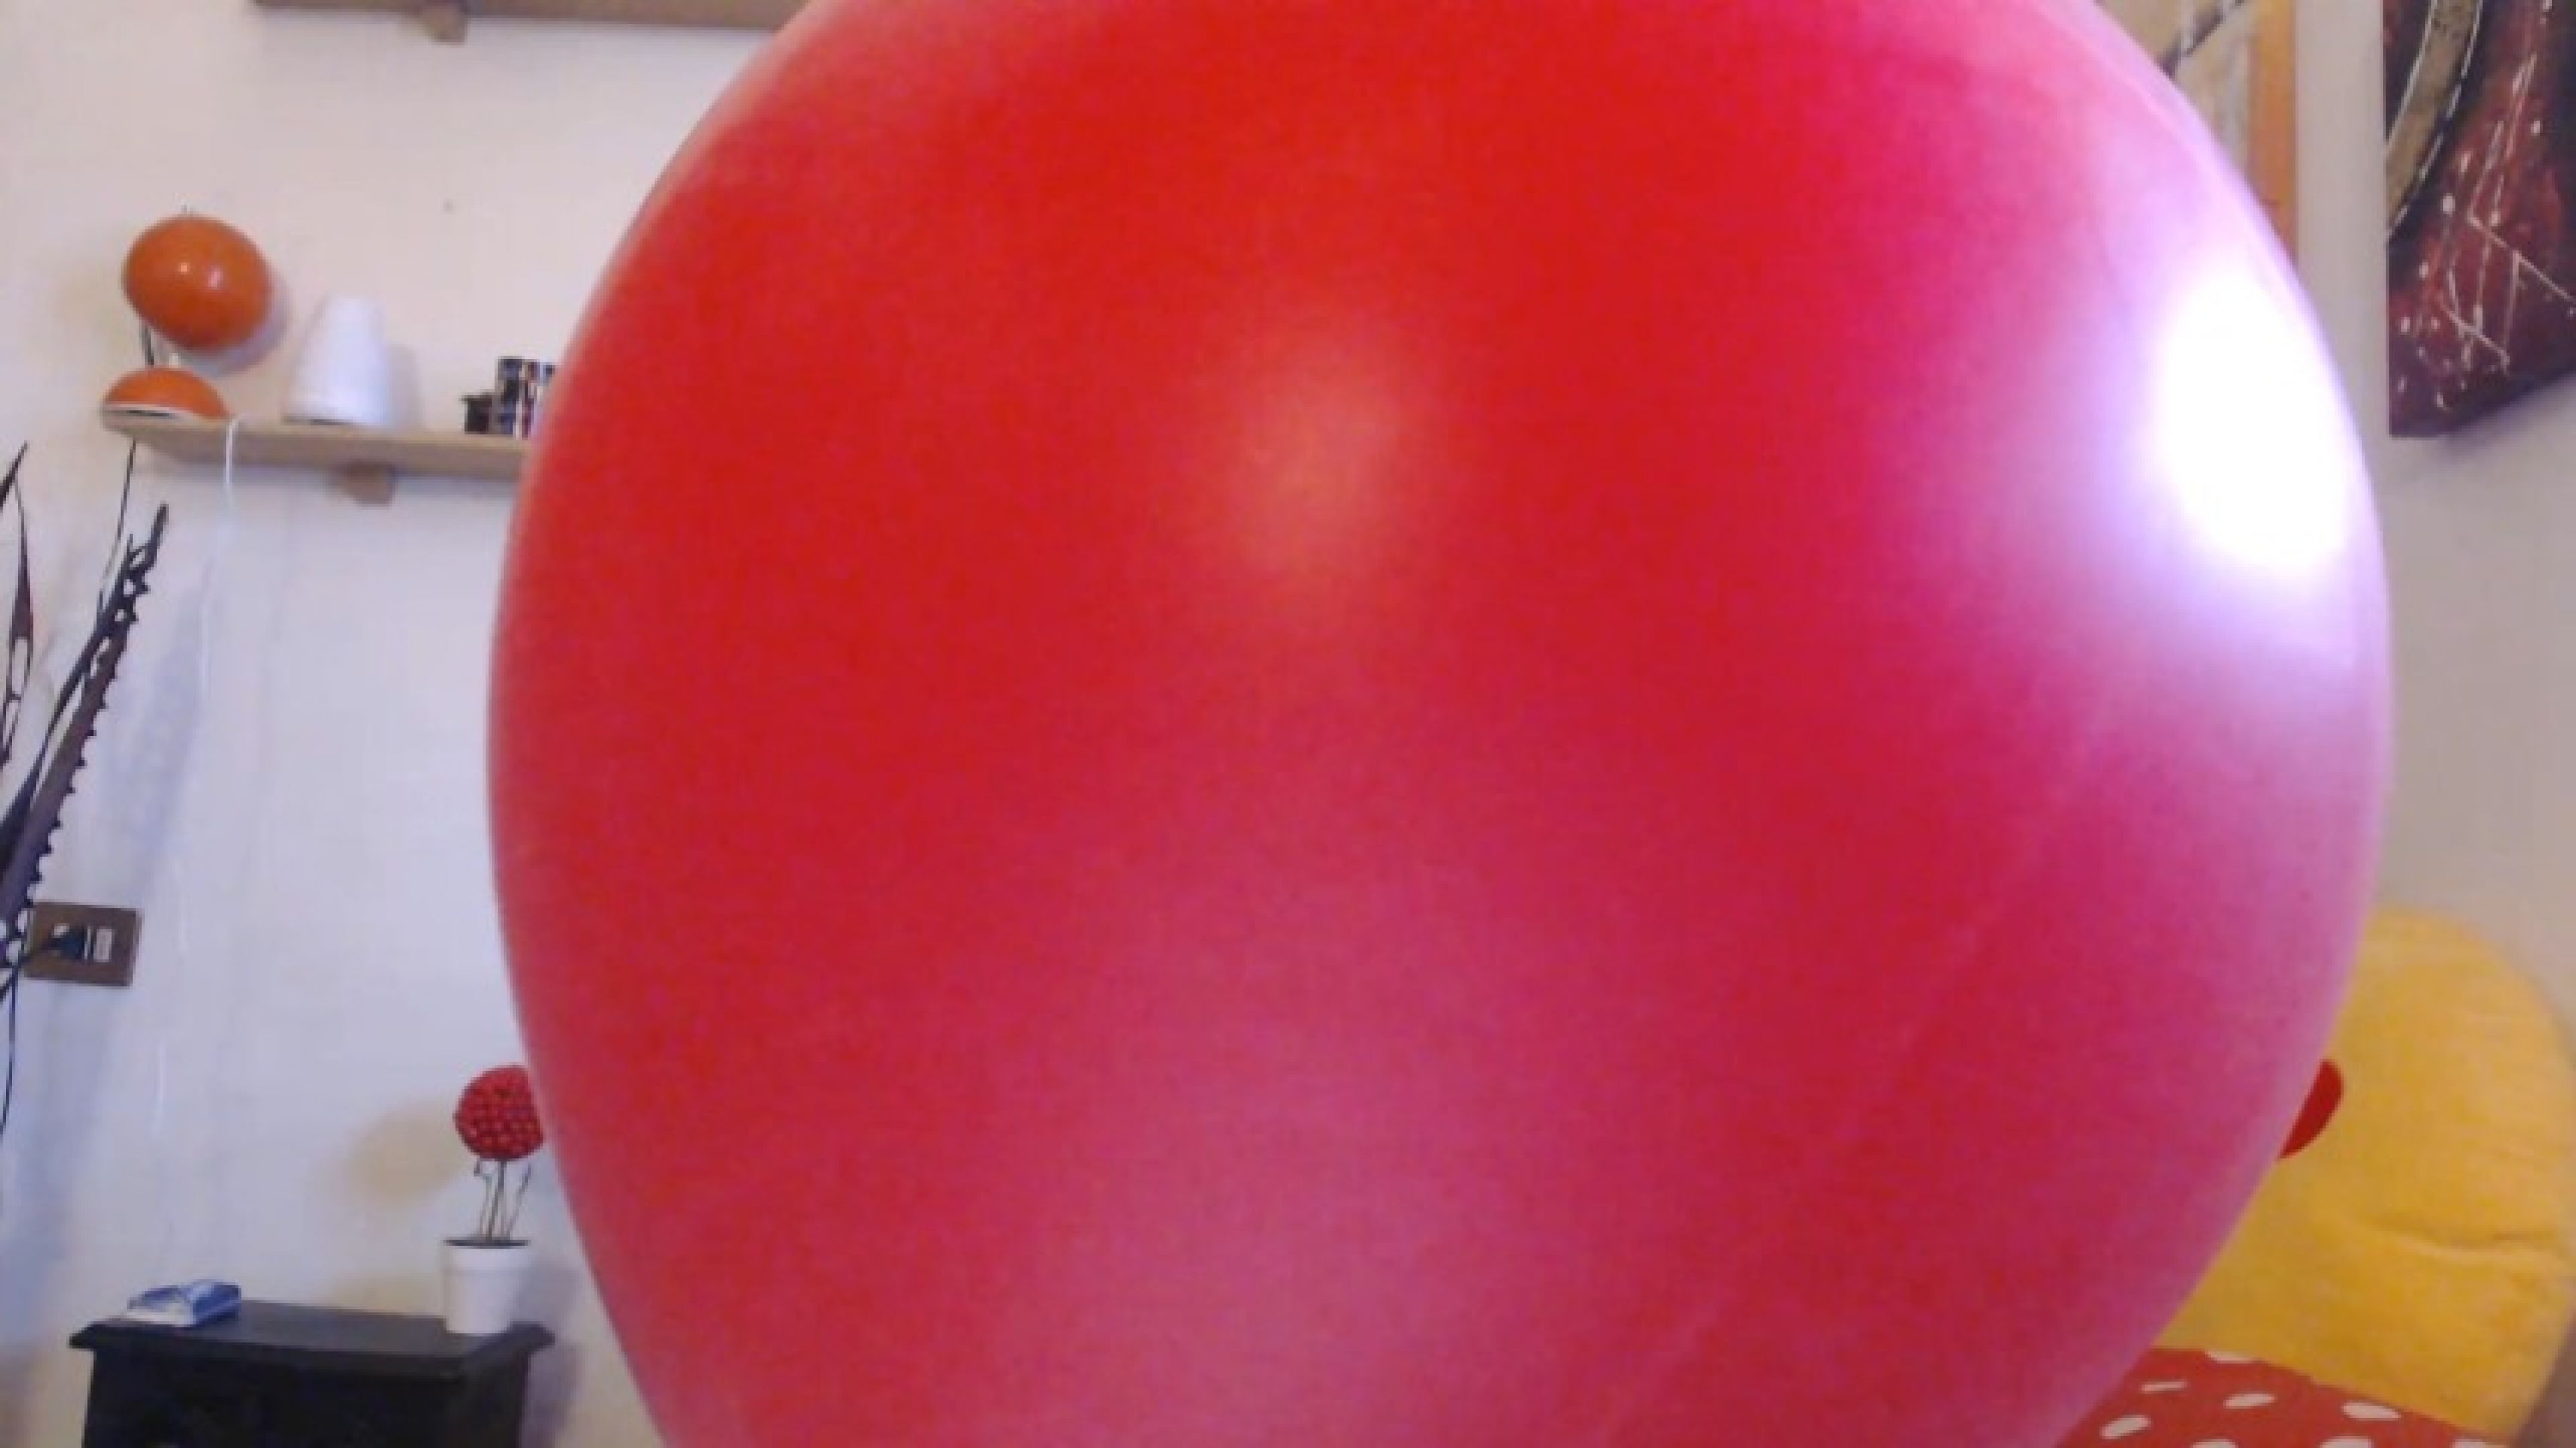 Red balloon to be fully inflated